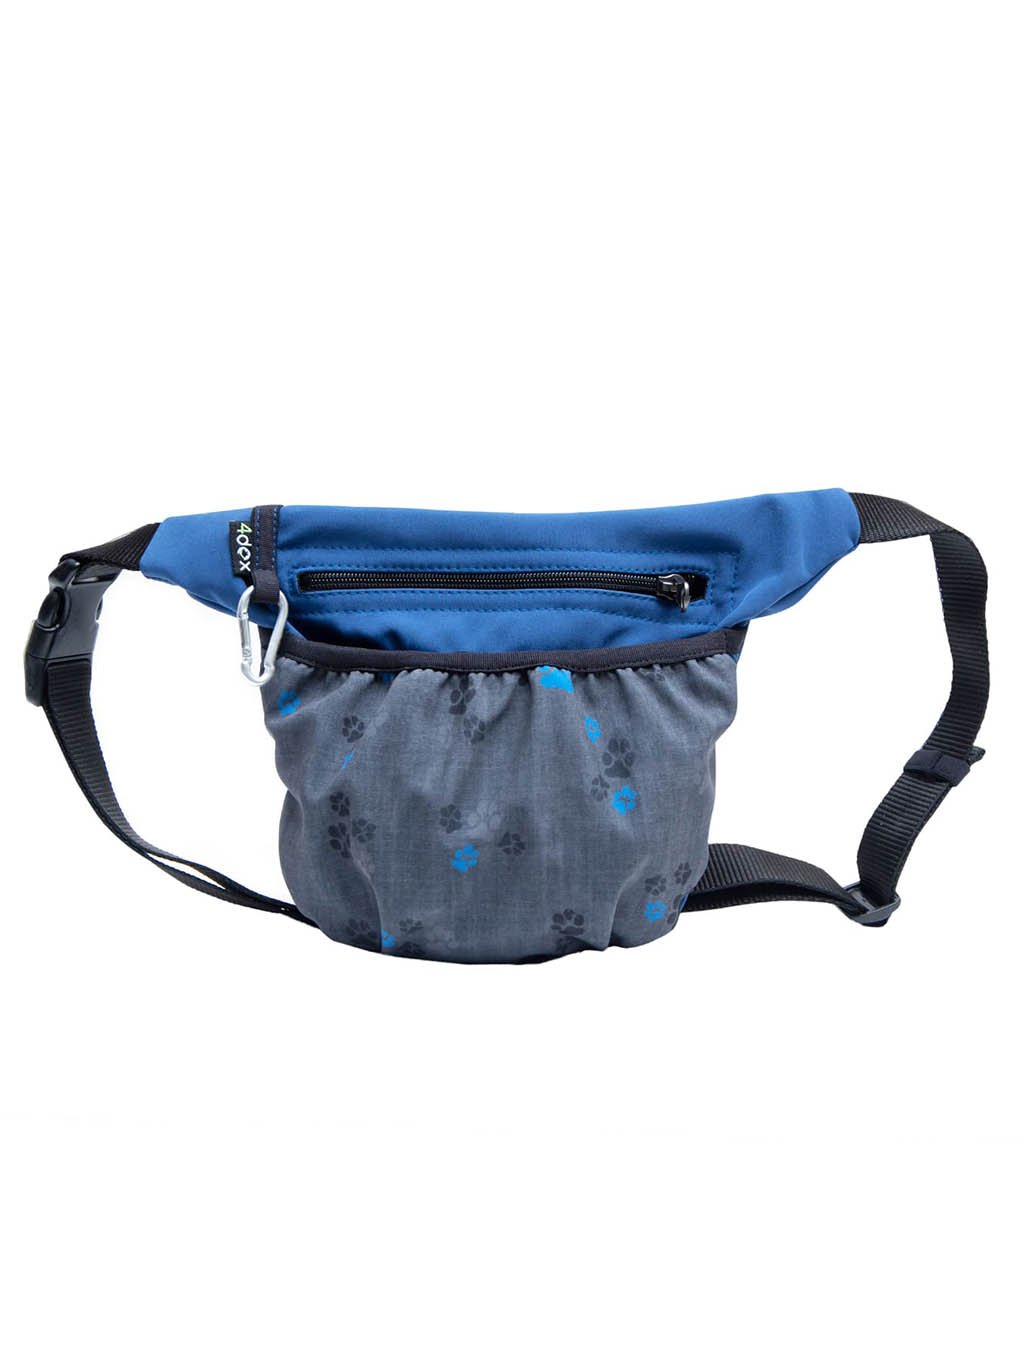 Dog training treat pouch with a magnetic fastening, blue No. 4